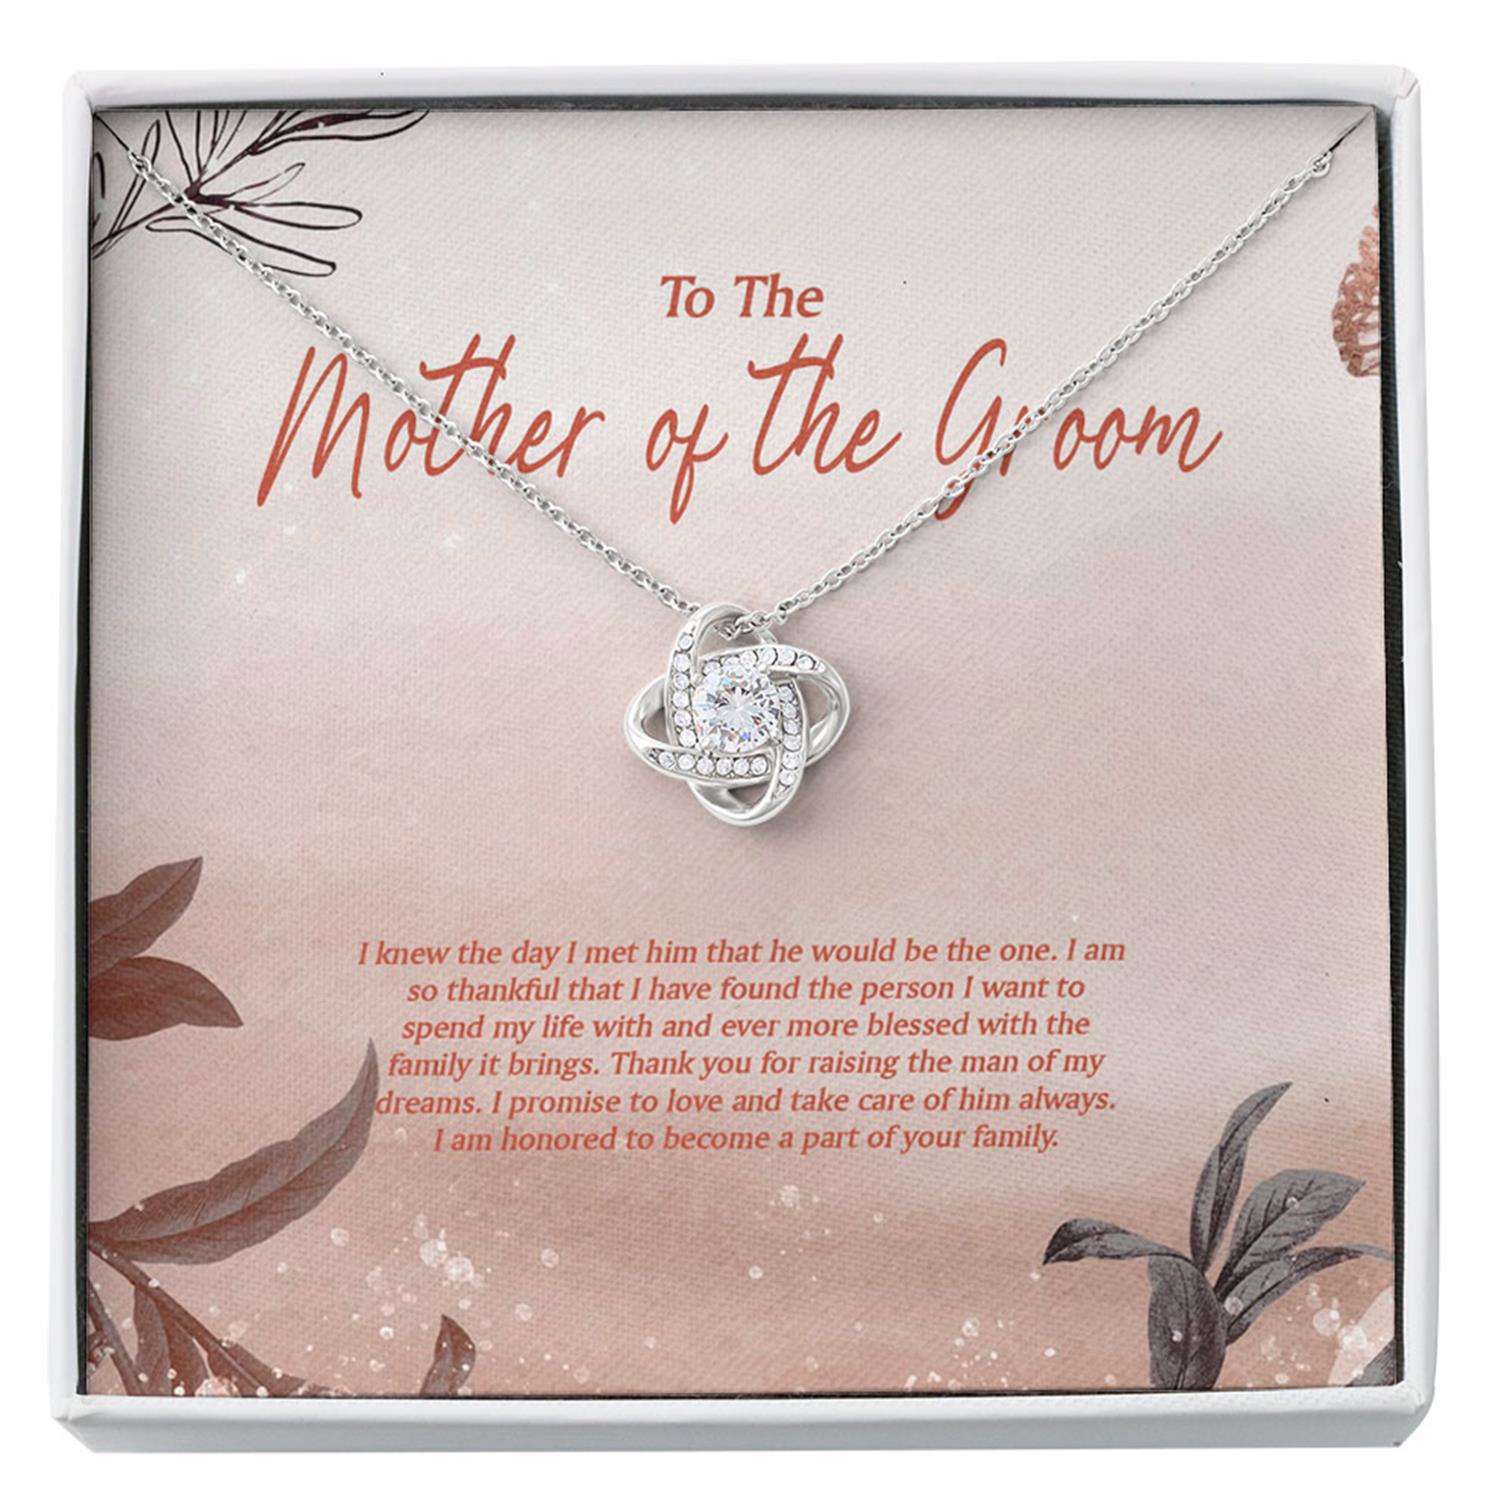 Mother Of The Bride Necklace Gift From Groom, Mother In Law Gift, Gift For Mother Of The Bride, Necklace For Mother In Law, Wedding Custom Necklace